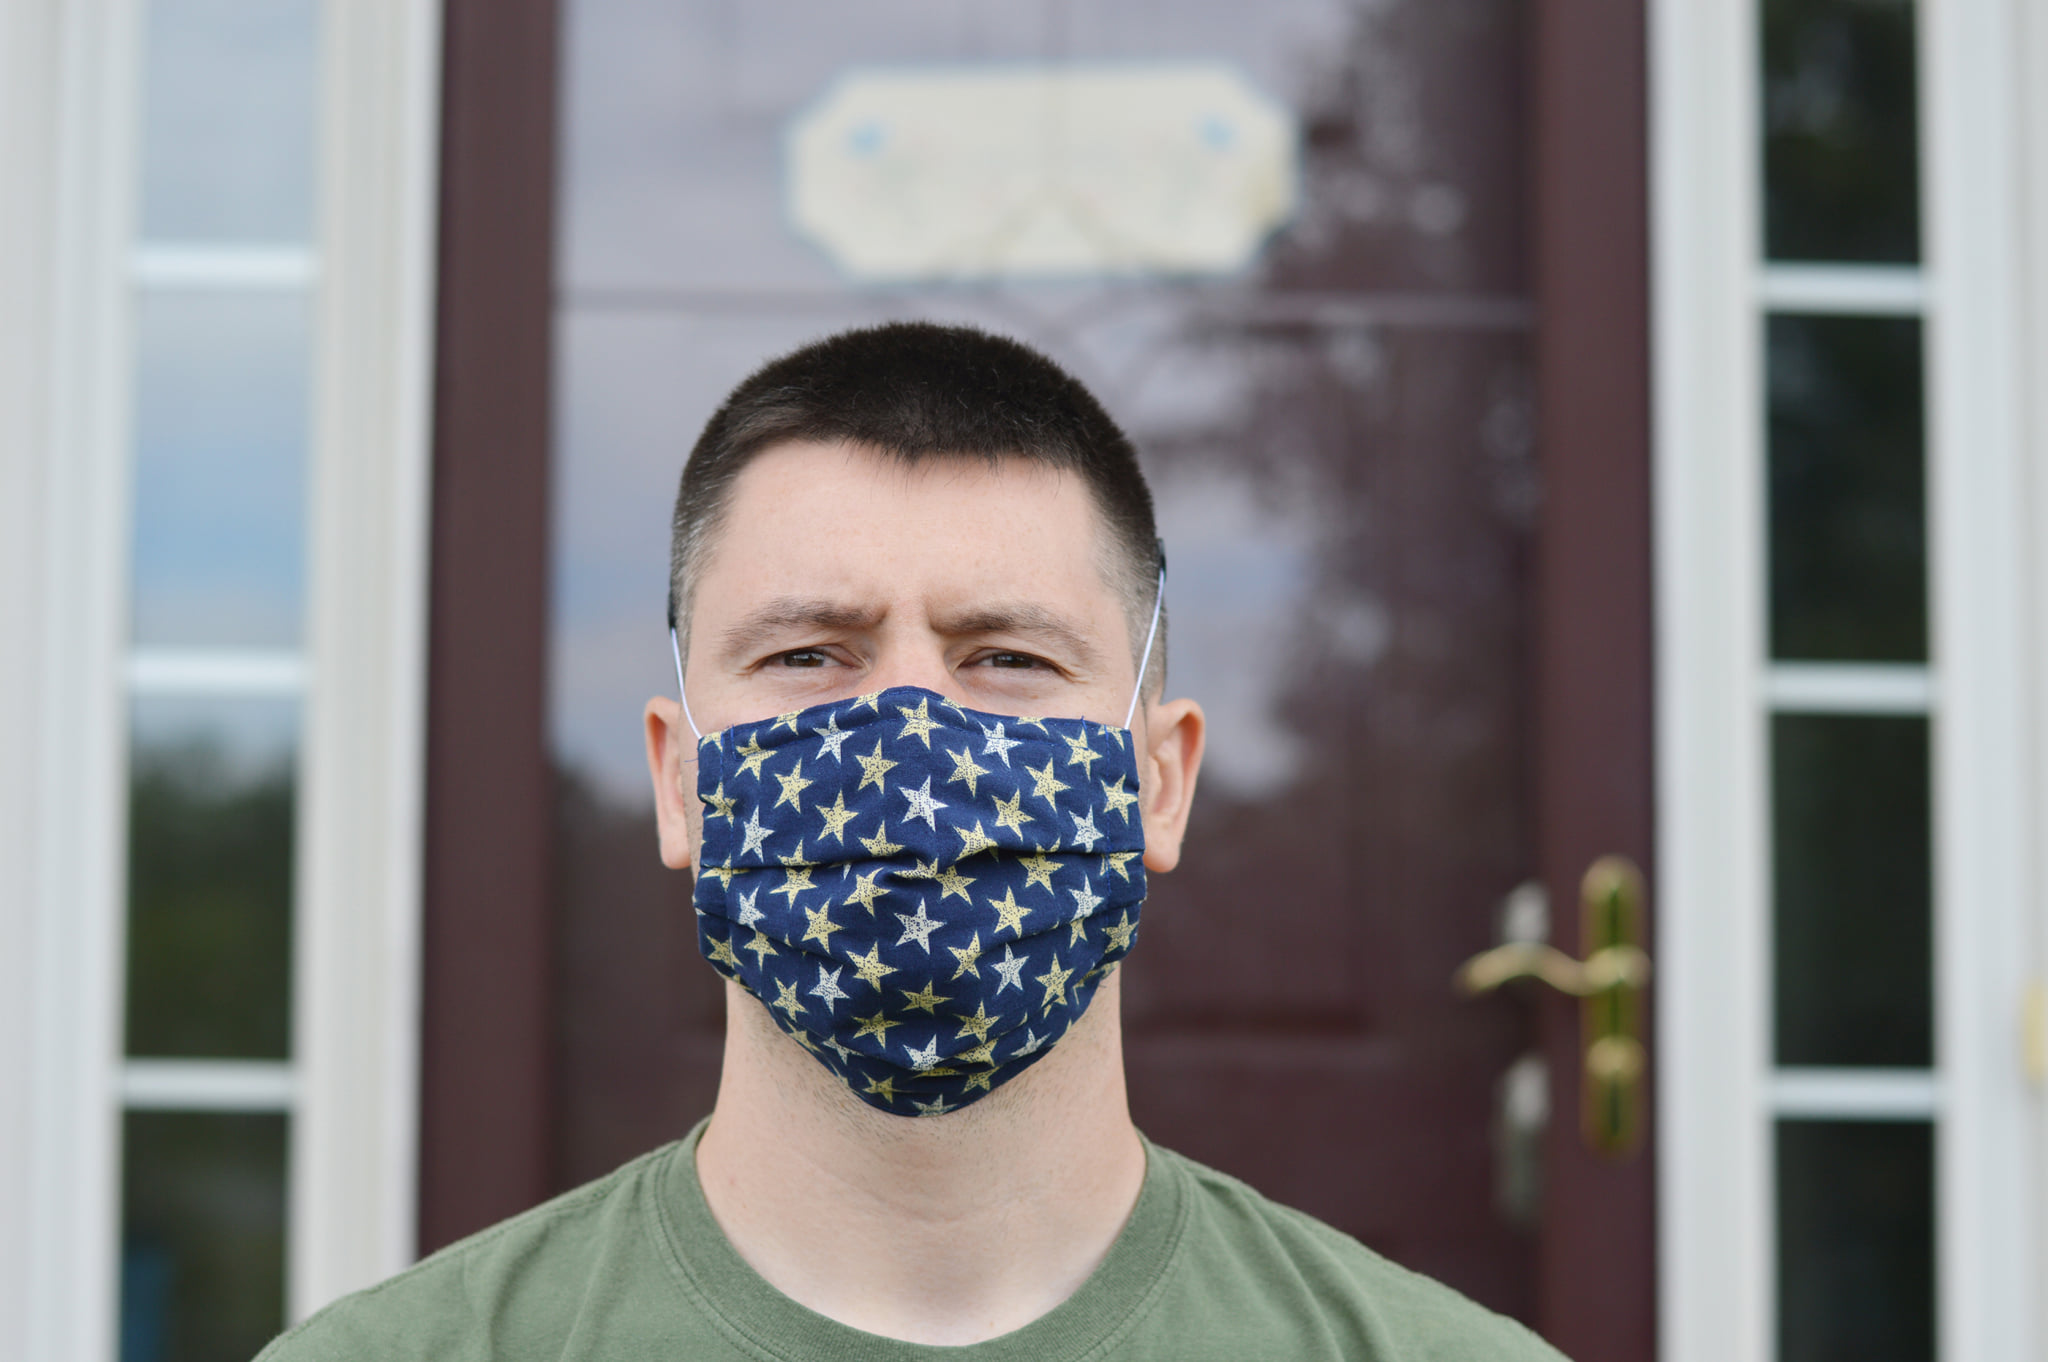 Male Model wearing a blue homemade cotton-fabric mask with white and gold star pattern